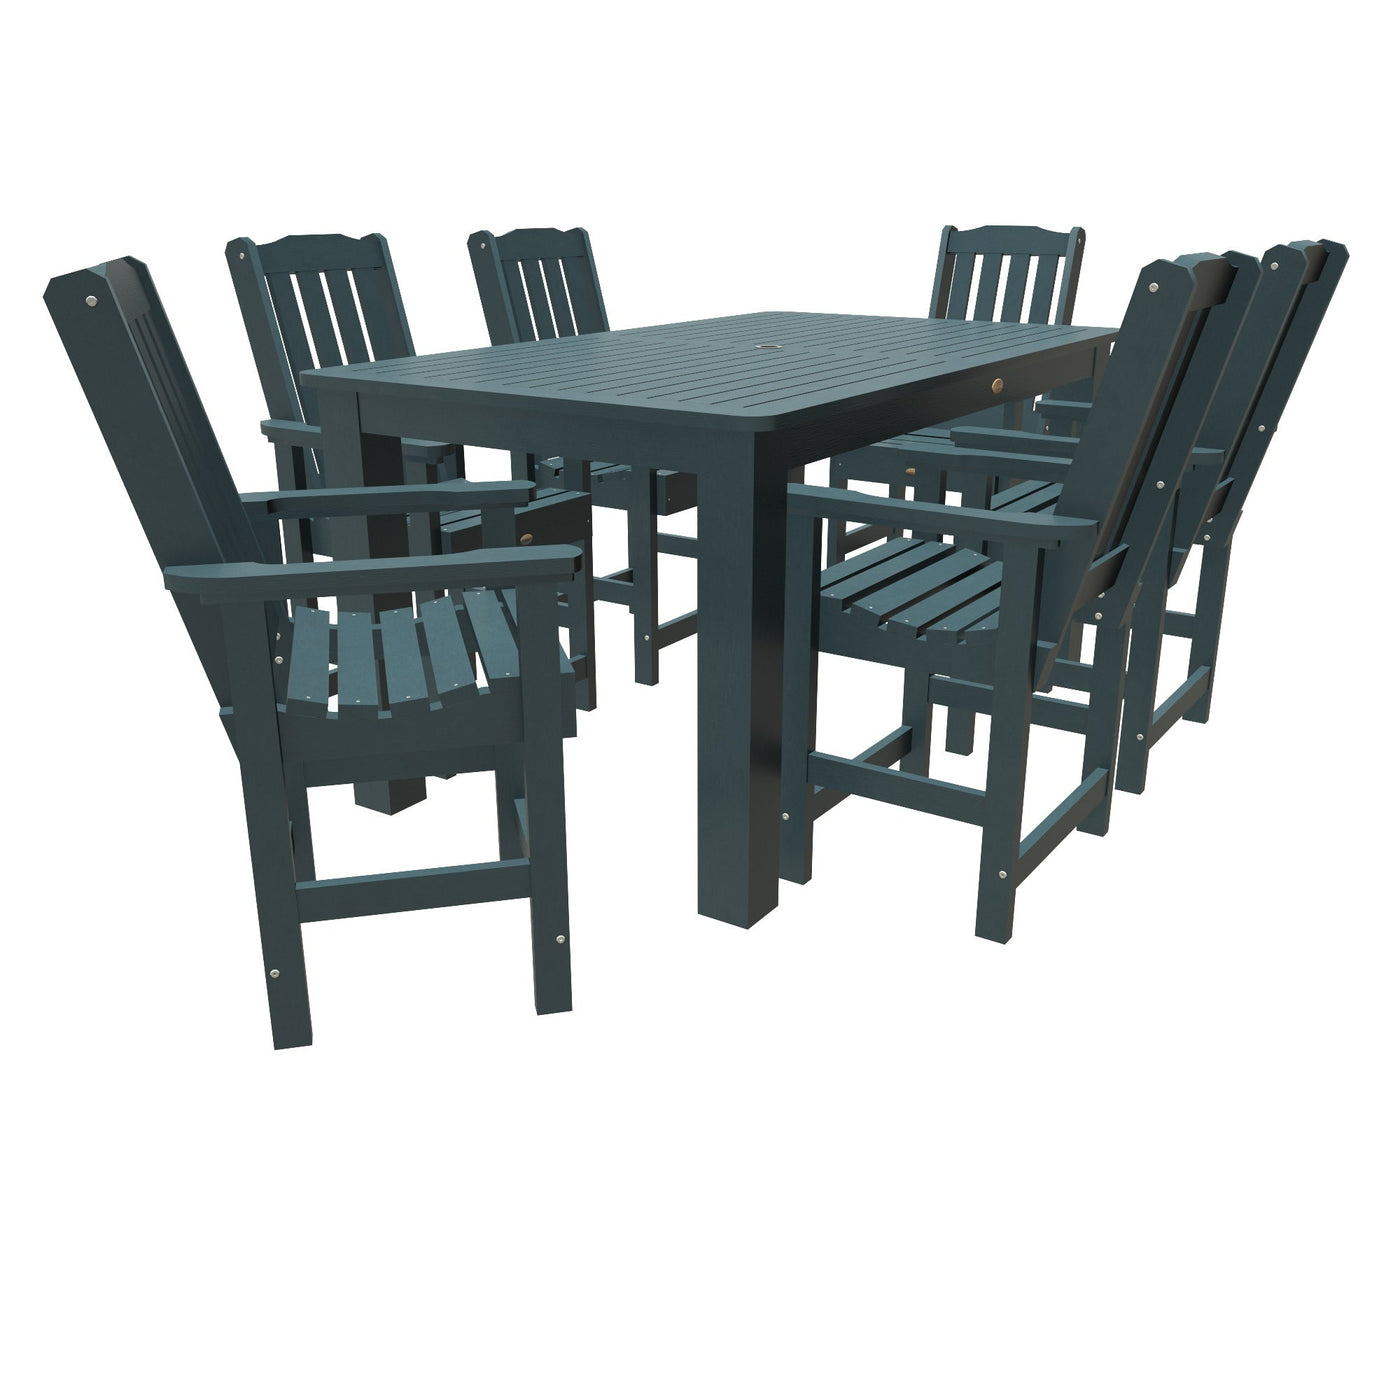 Lehigh 7pc Rectangular Outdoor Dining Set 42in x 72in - Counter Height Dining Highwood USA Nantucket Blue 